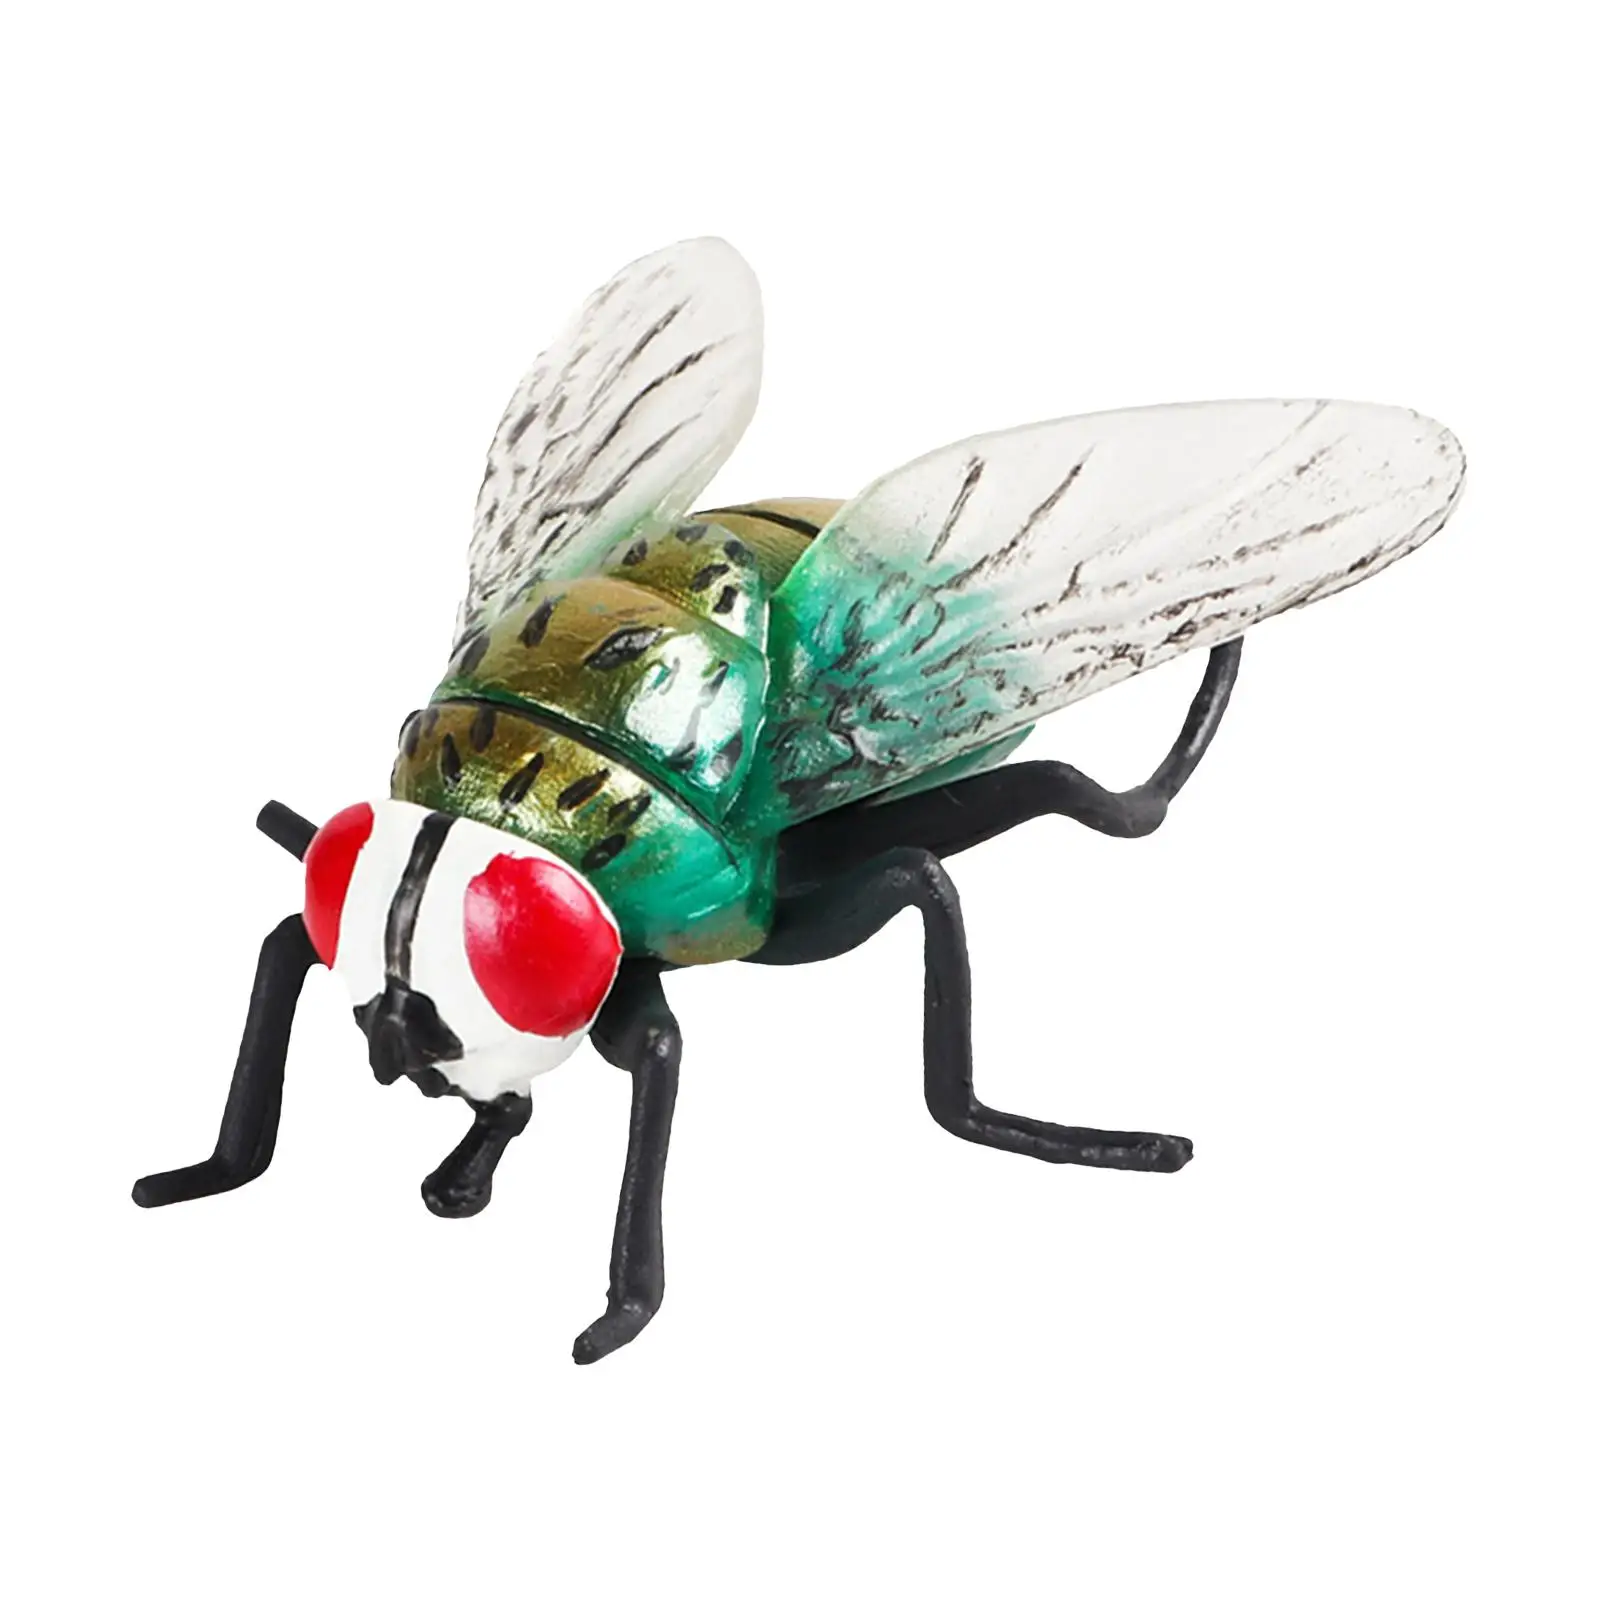 Realistic Fly Toys Cognition Educational Toy Flies Figures Photography Props Party Supplies Collection for Children Kids Girls